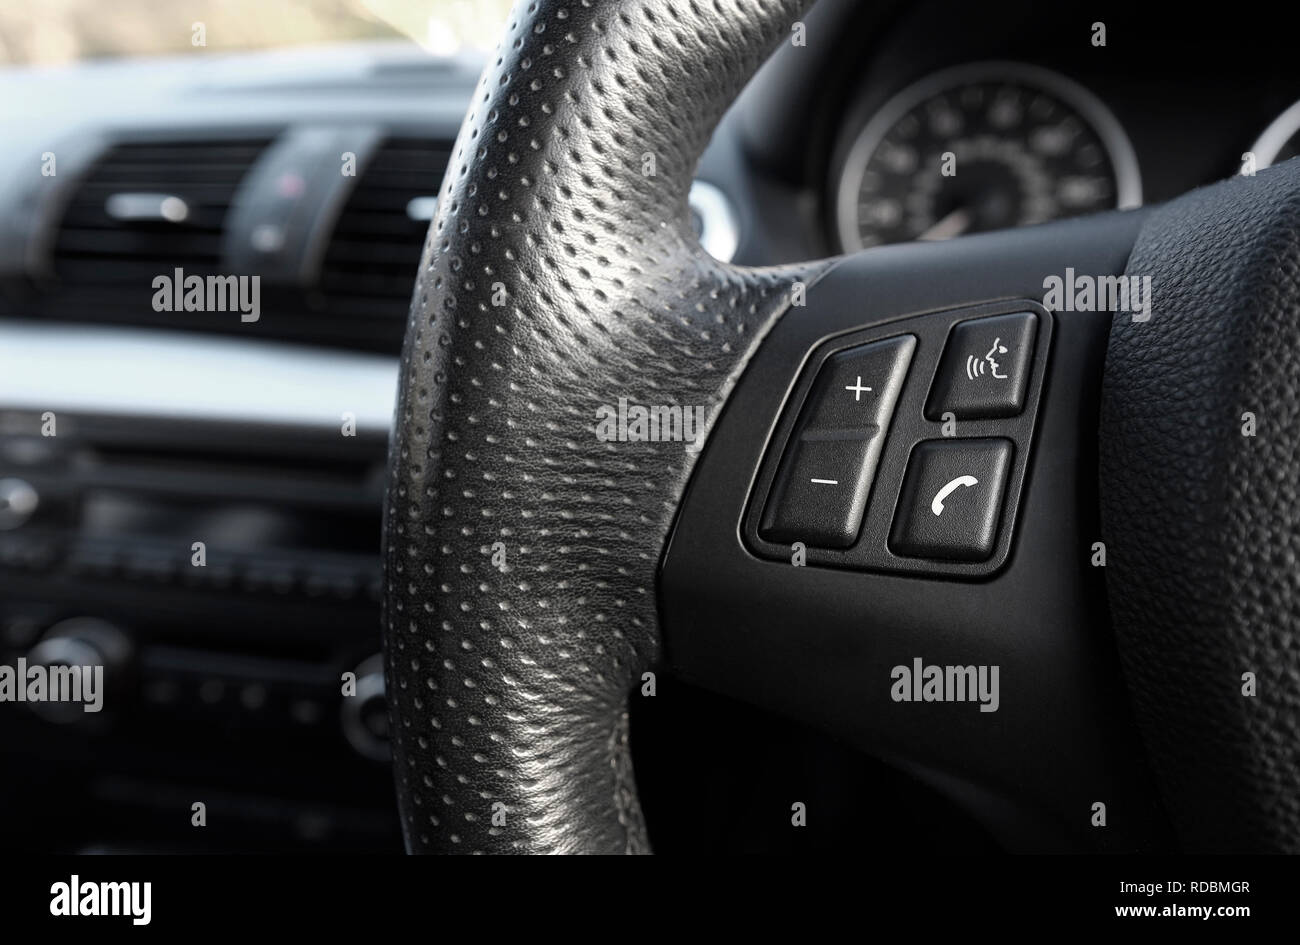 mobile phone buttons on car steering wheel Stock Photo